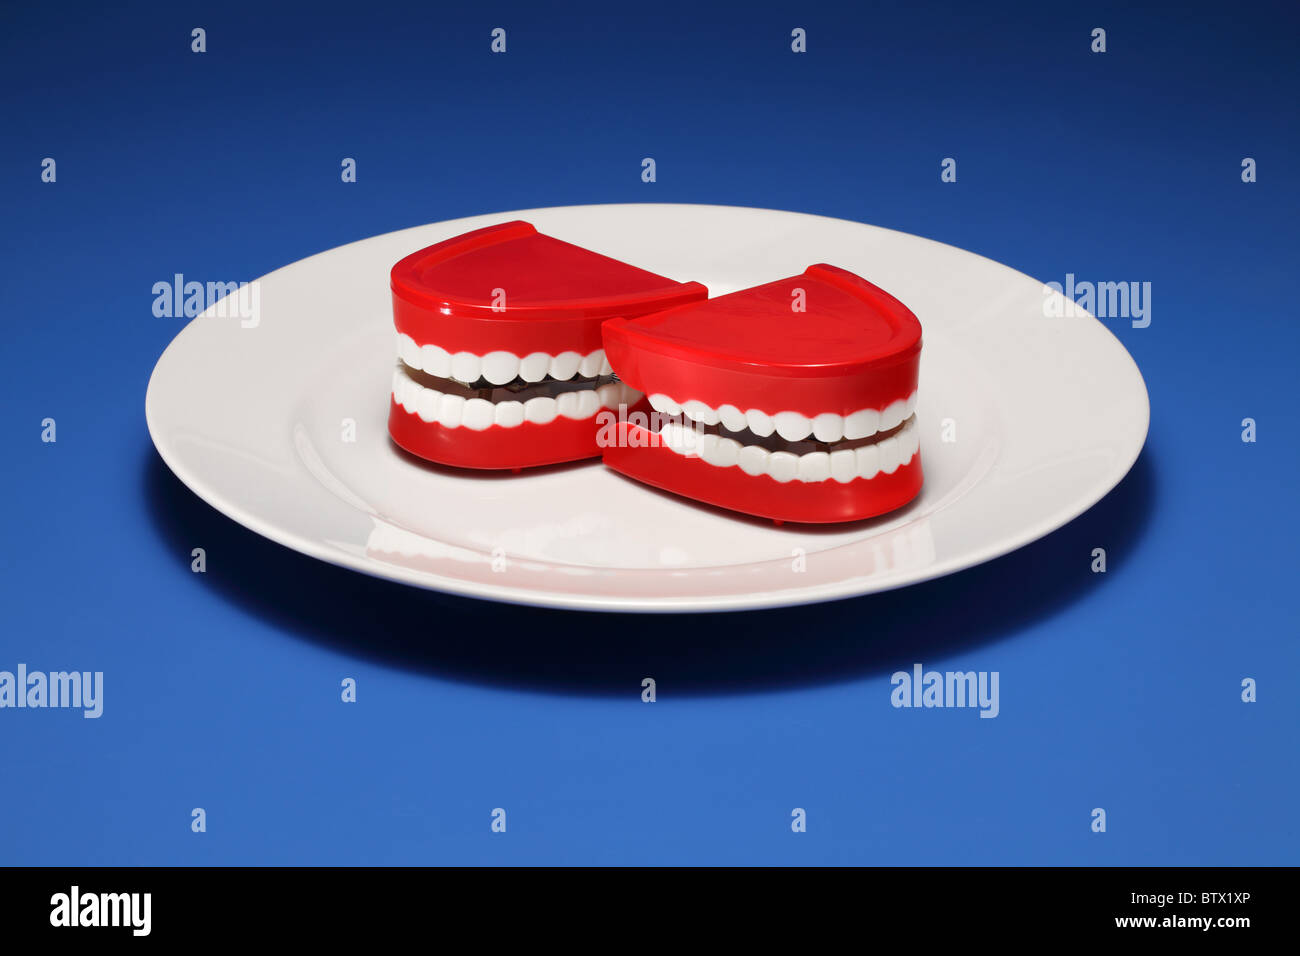 Two plastic gums and teeth on a white dinner plate Stock Photo